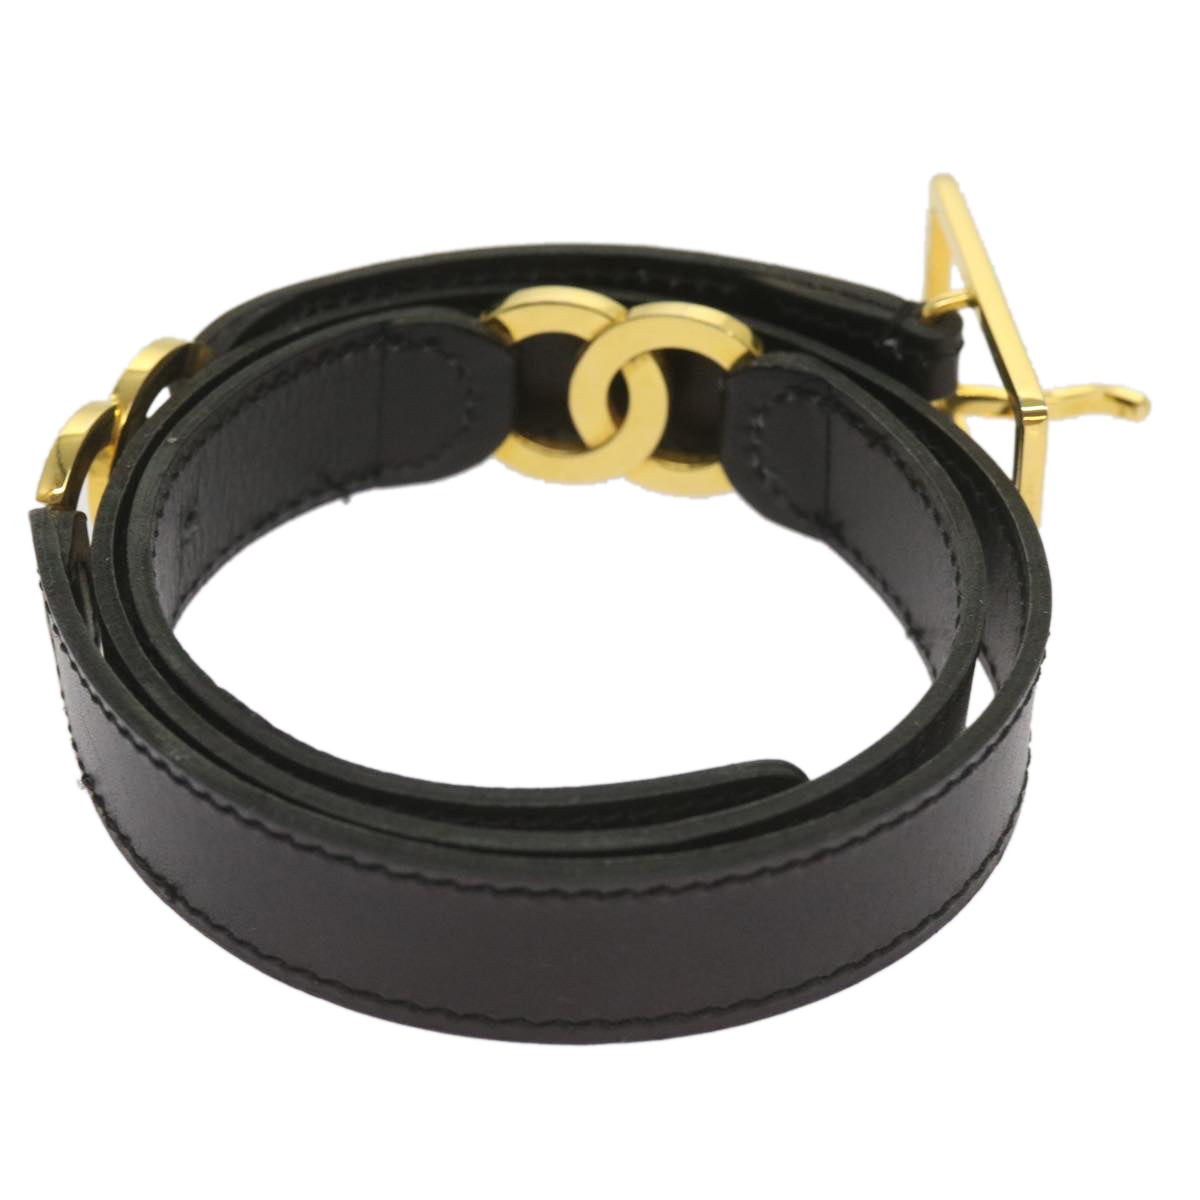 CHANEL COCO Mark Belt Leather 28"" Black CC Auth 68326